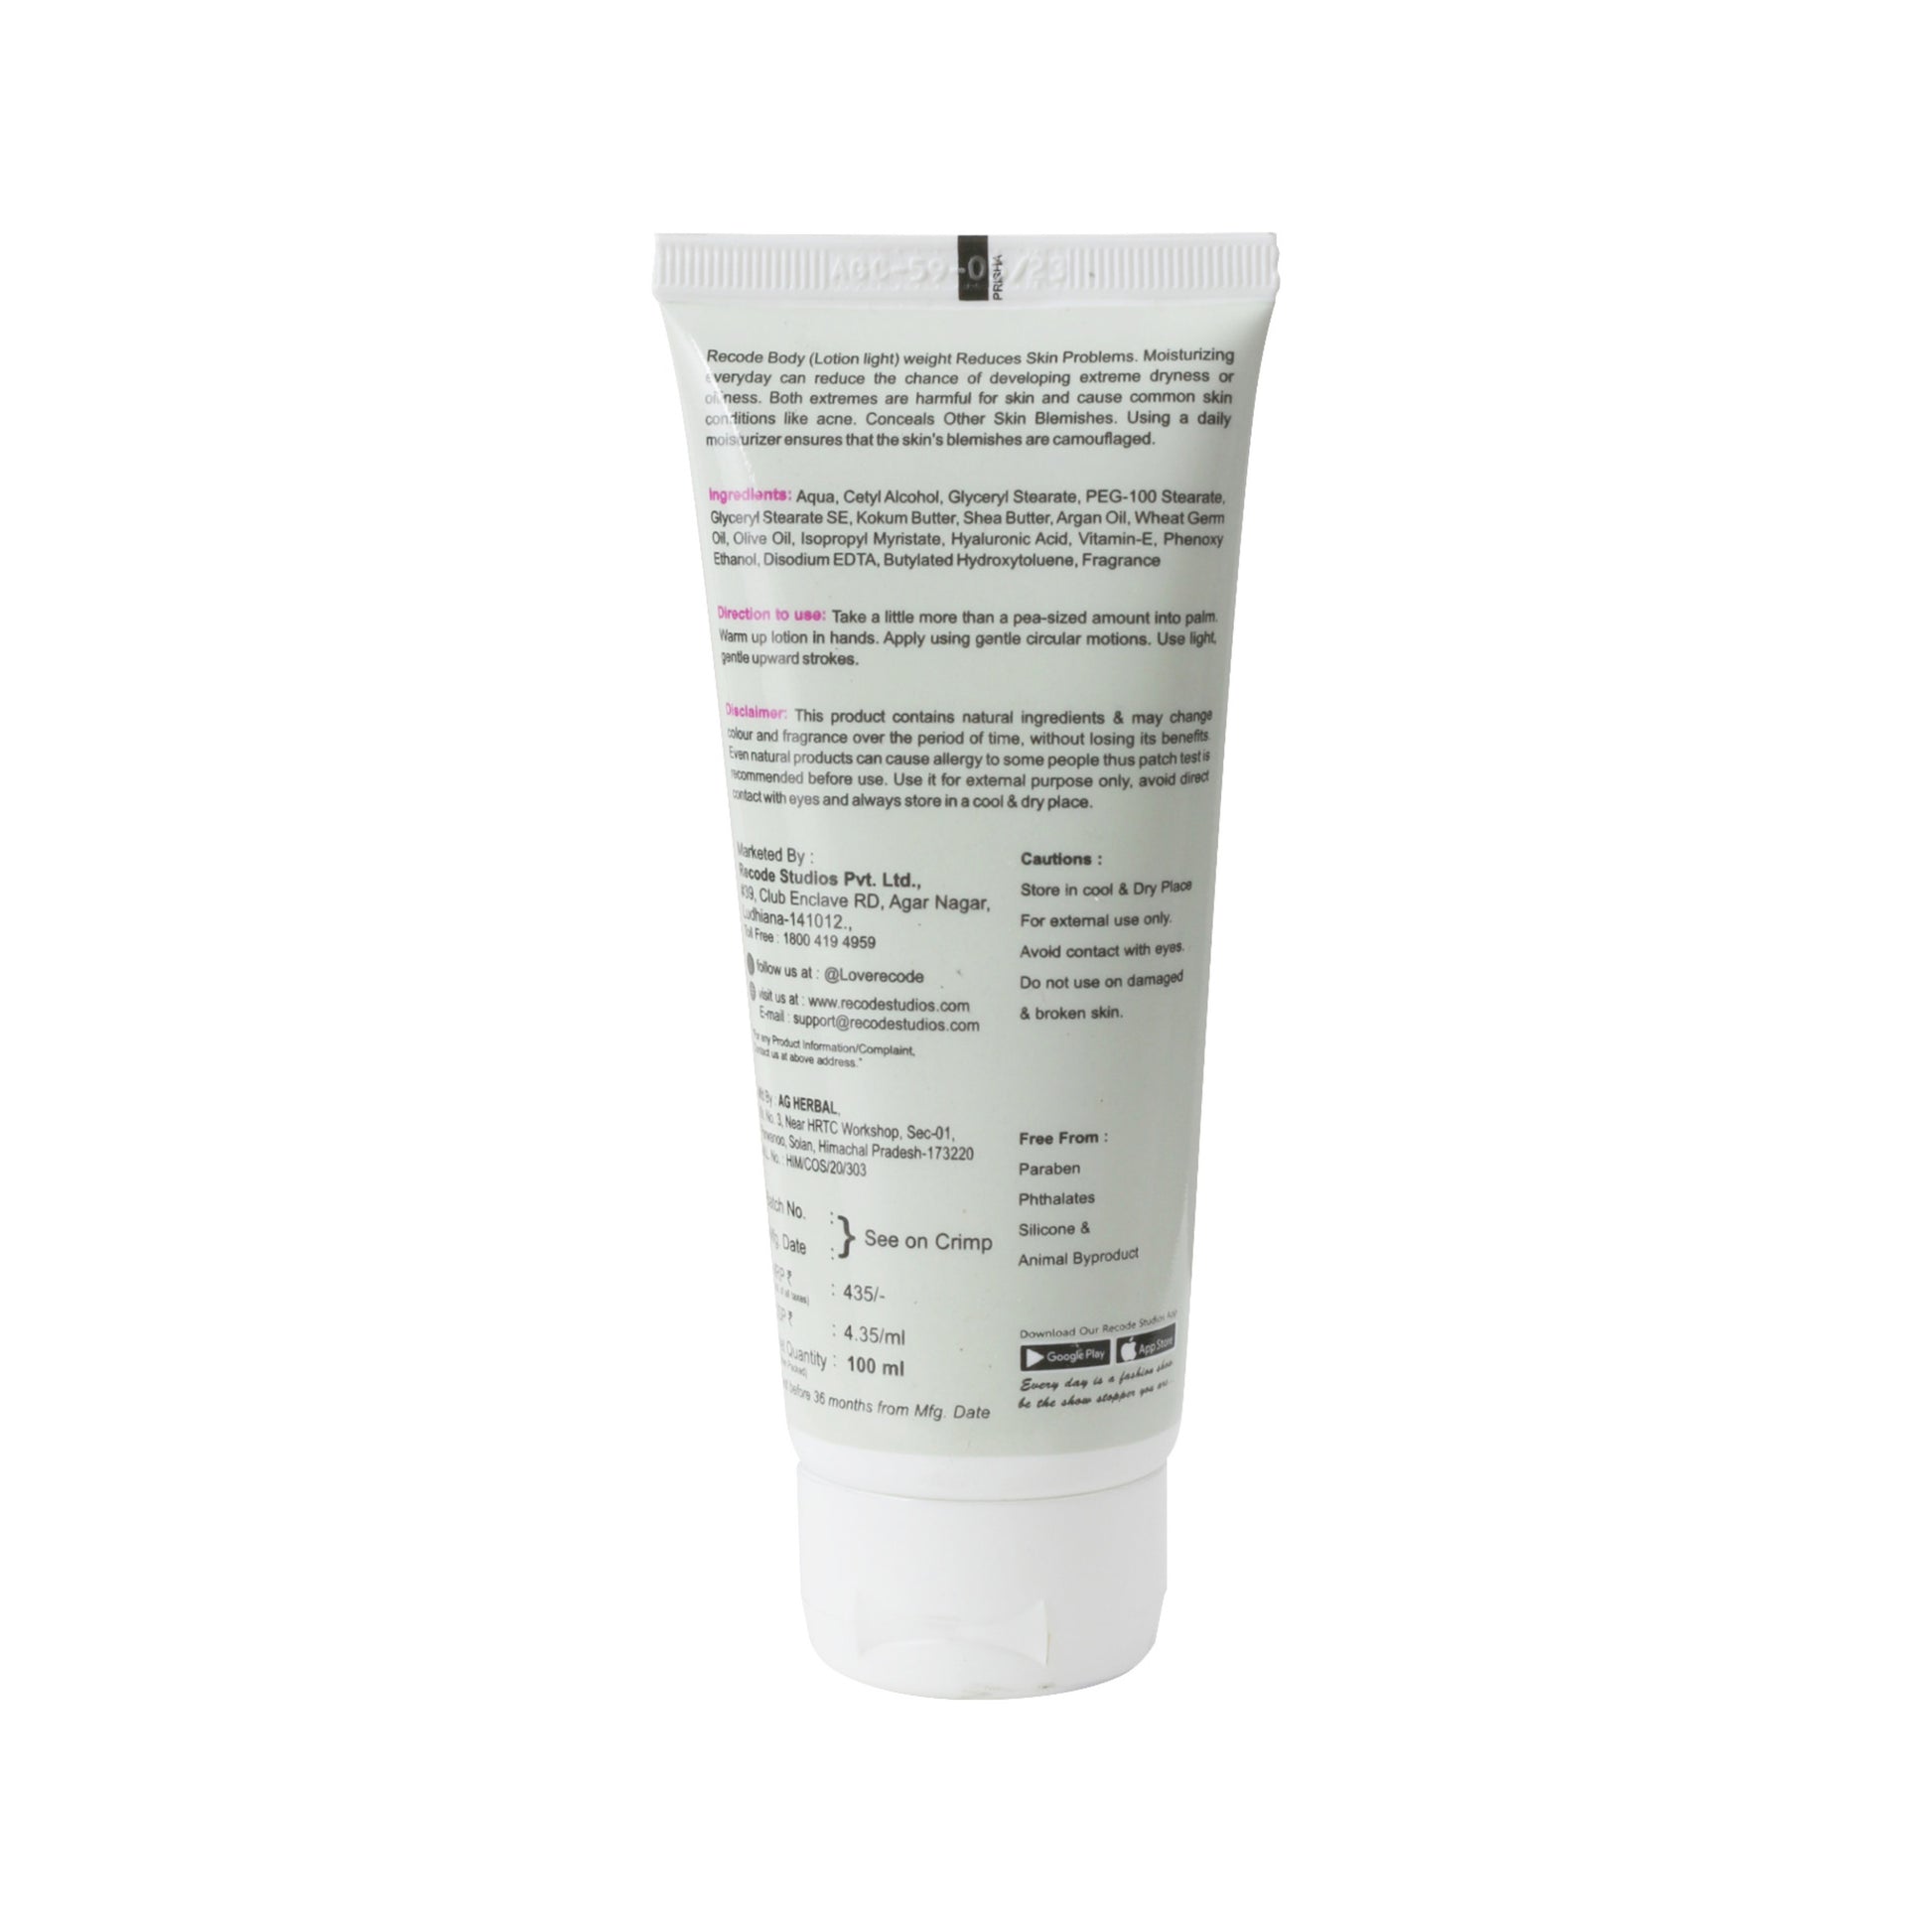 Recode Body Lotion (Light Weight) 100 ML